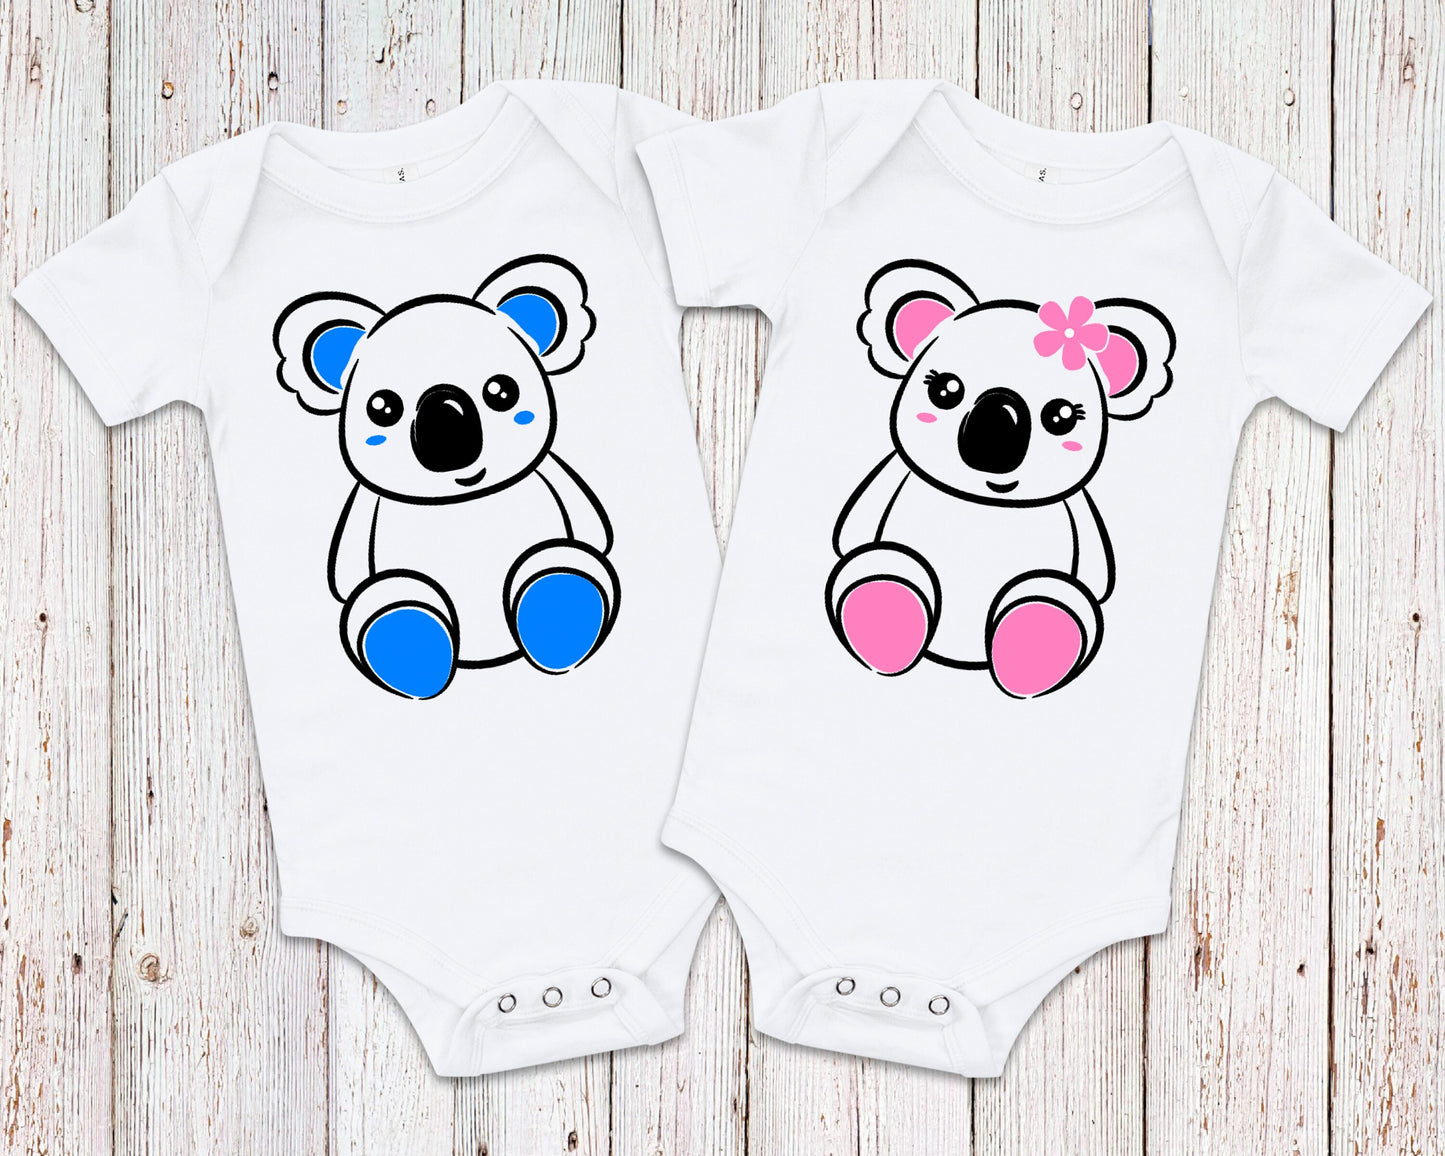 Boy Girl Twins Koala T-Shirts or Bodysuits - Gift for Twins - Fraternal Twins - Matching Brother Sister Shirts - Sibling Shirts - Twins gift